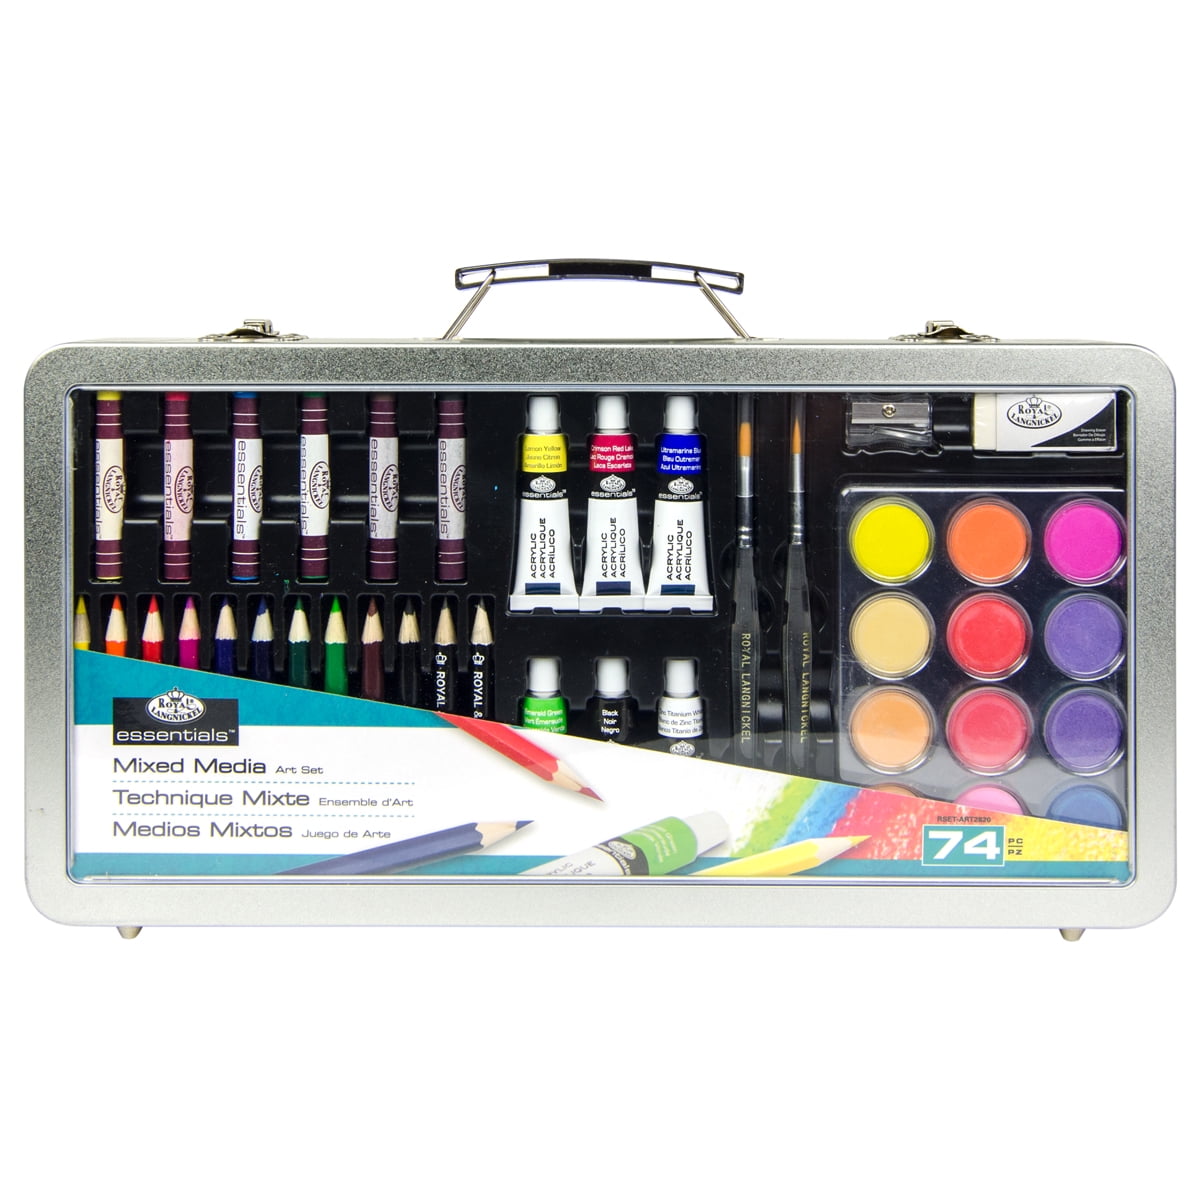 Essentials Oil Deluxe Art Set in Clearview Case (32pc) Royal & Langnickel